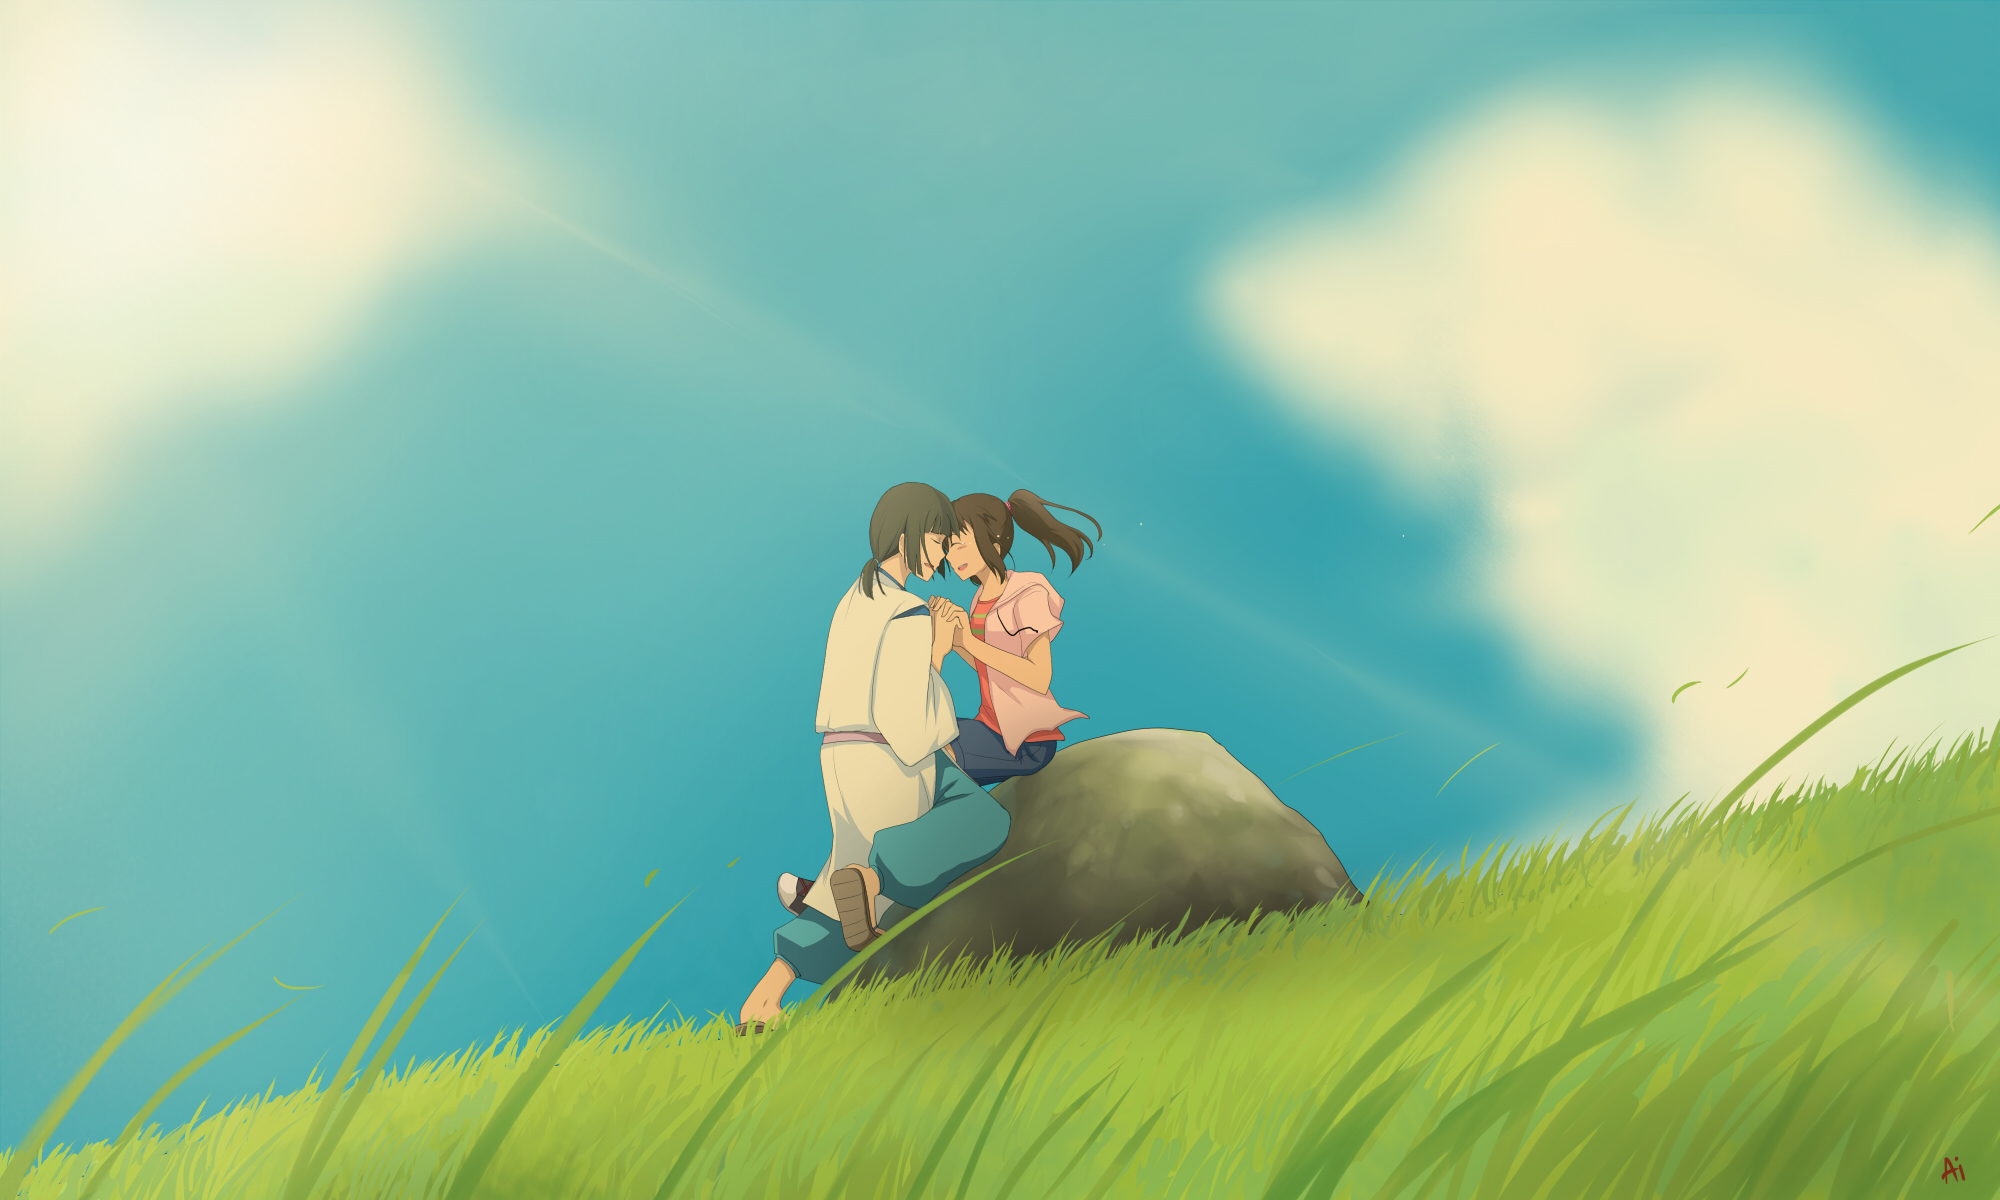 HD desktop wallpaper featuring characters from Spirited Away, a Studio Ghibli film, sitting together on a grassy hill with a serene sky in the background.